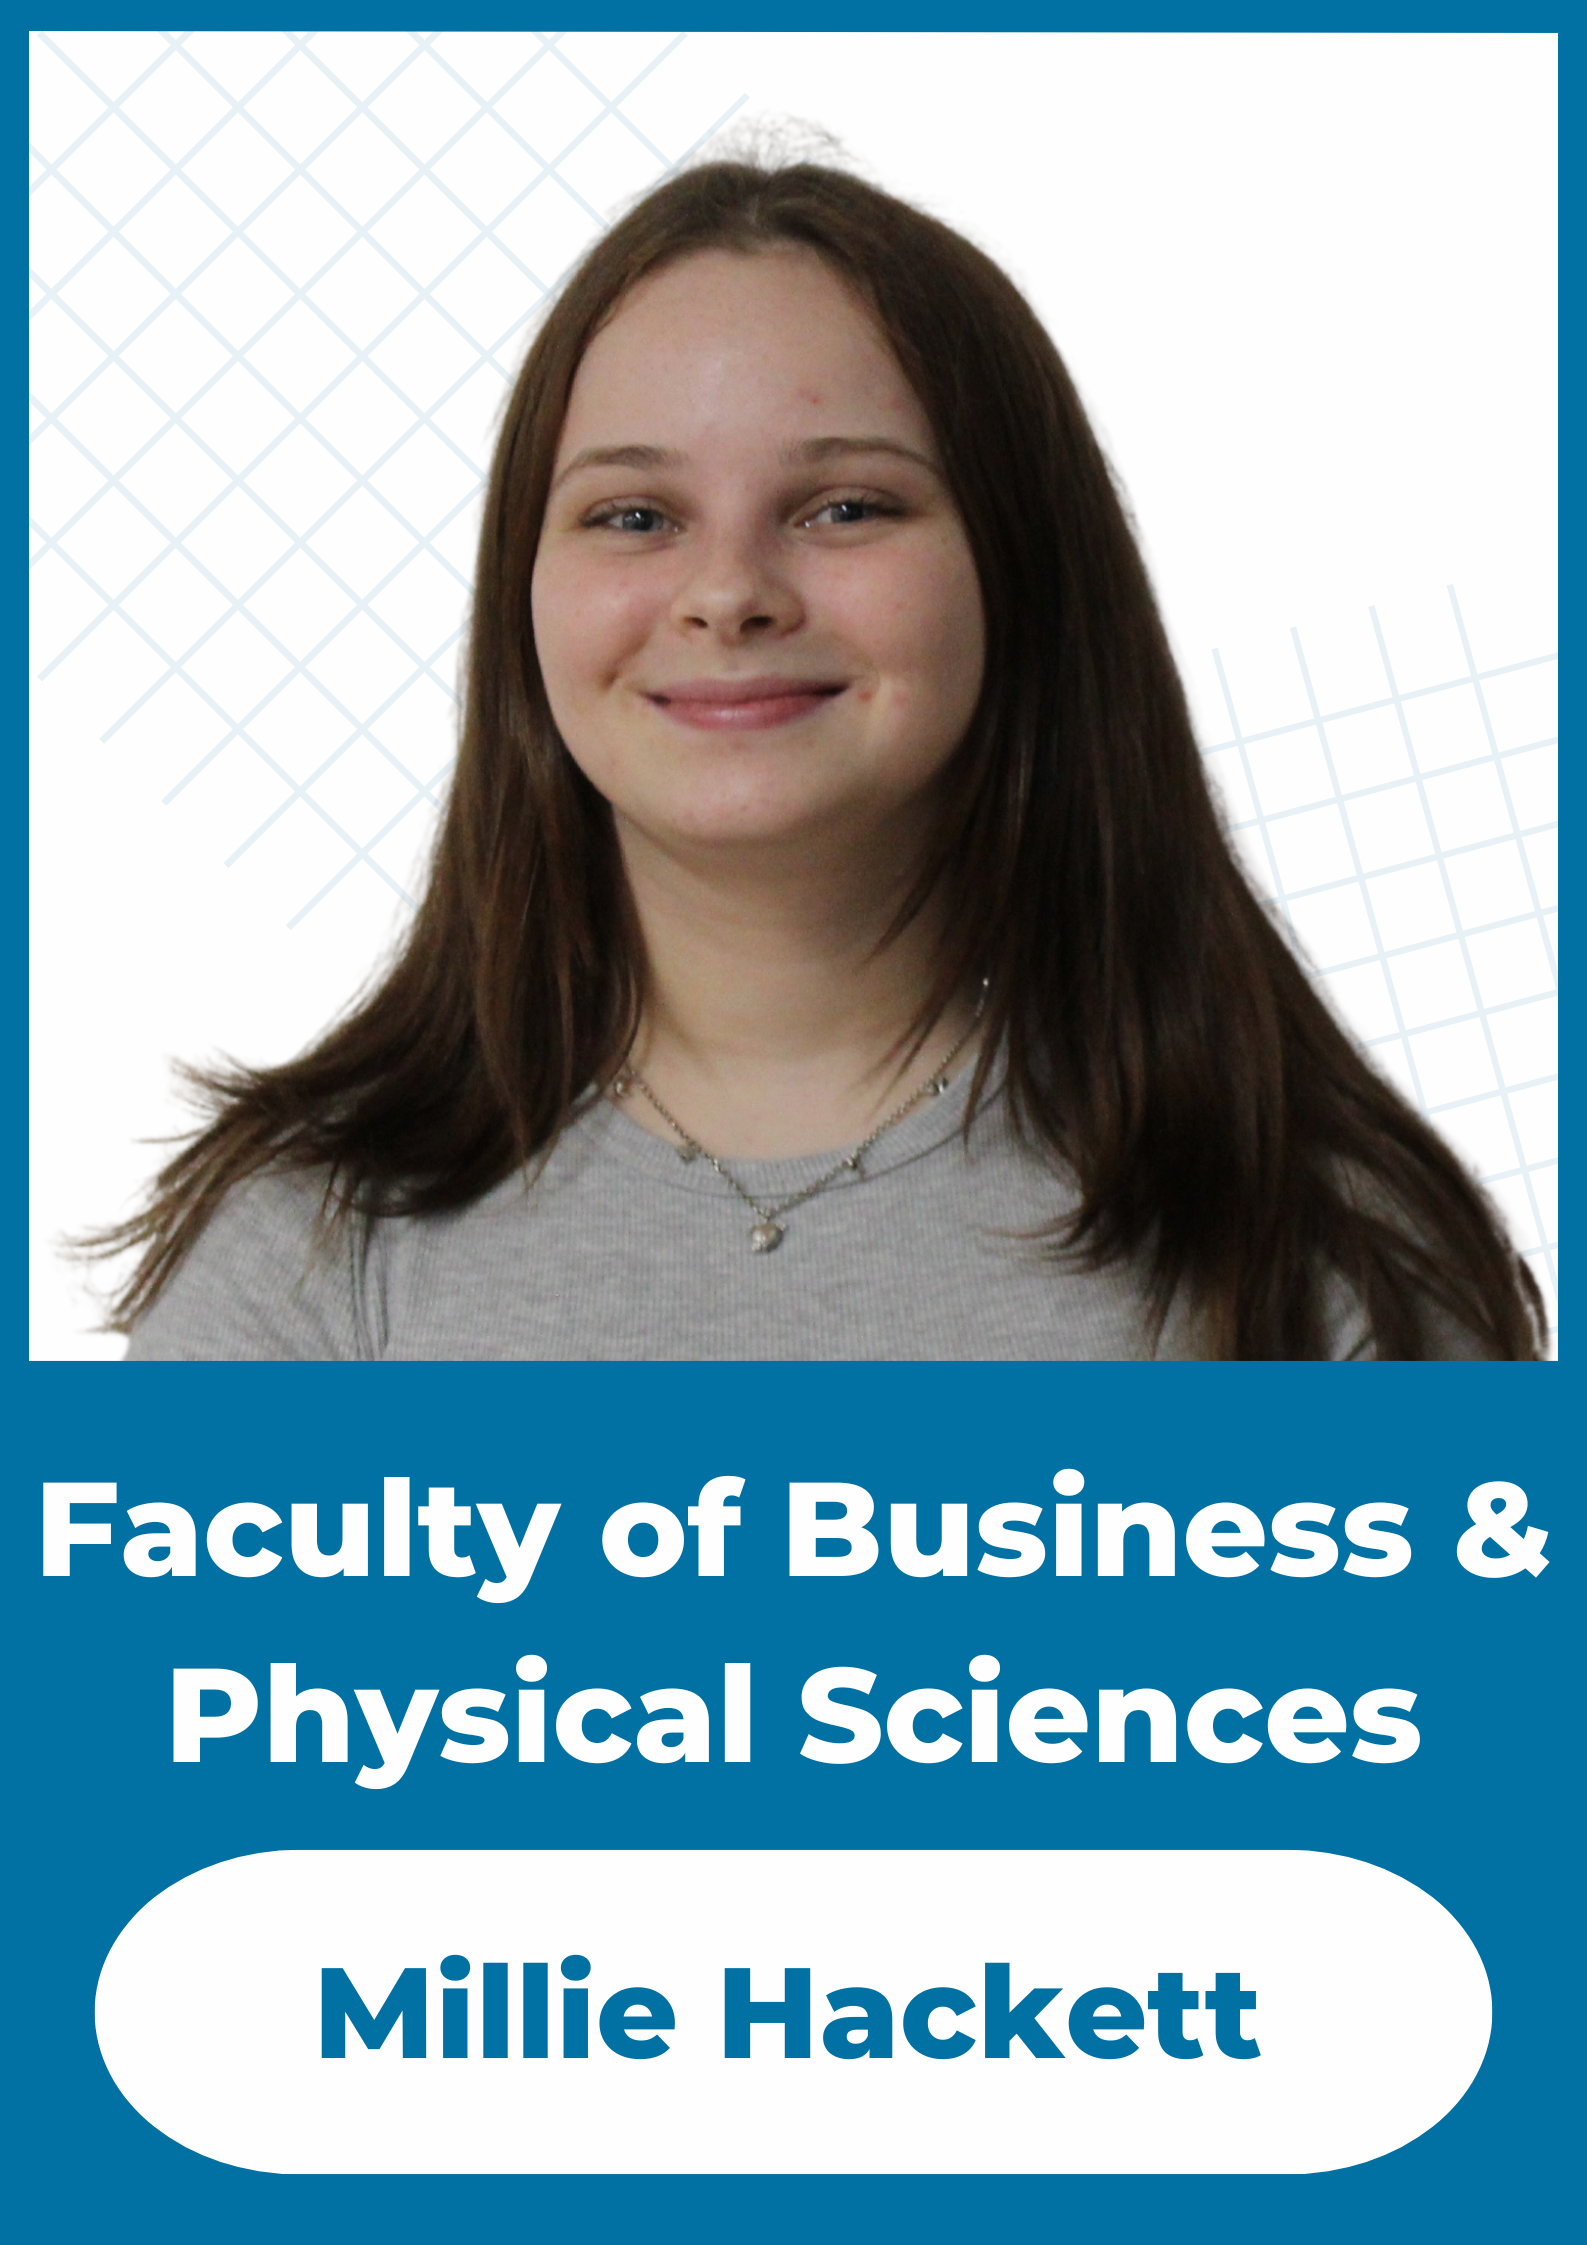 Faculty of Business and Physical Sciences (UG) - ZOE HAYNE (she/her)